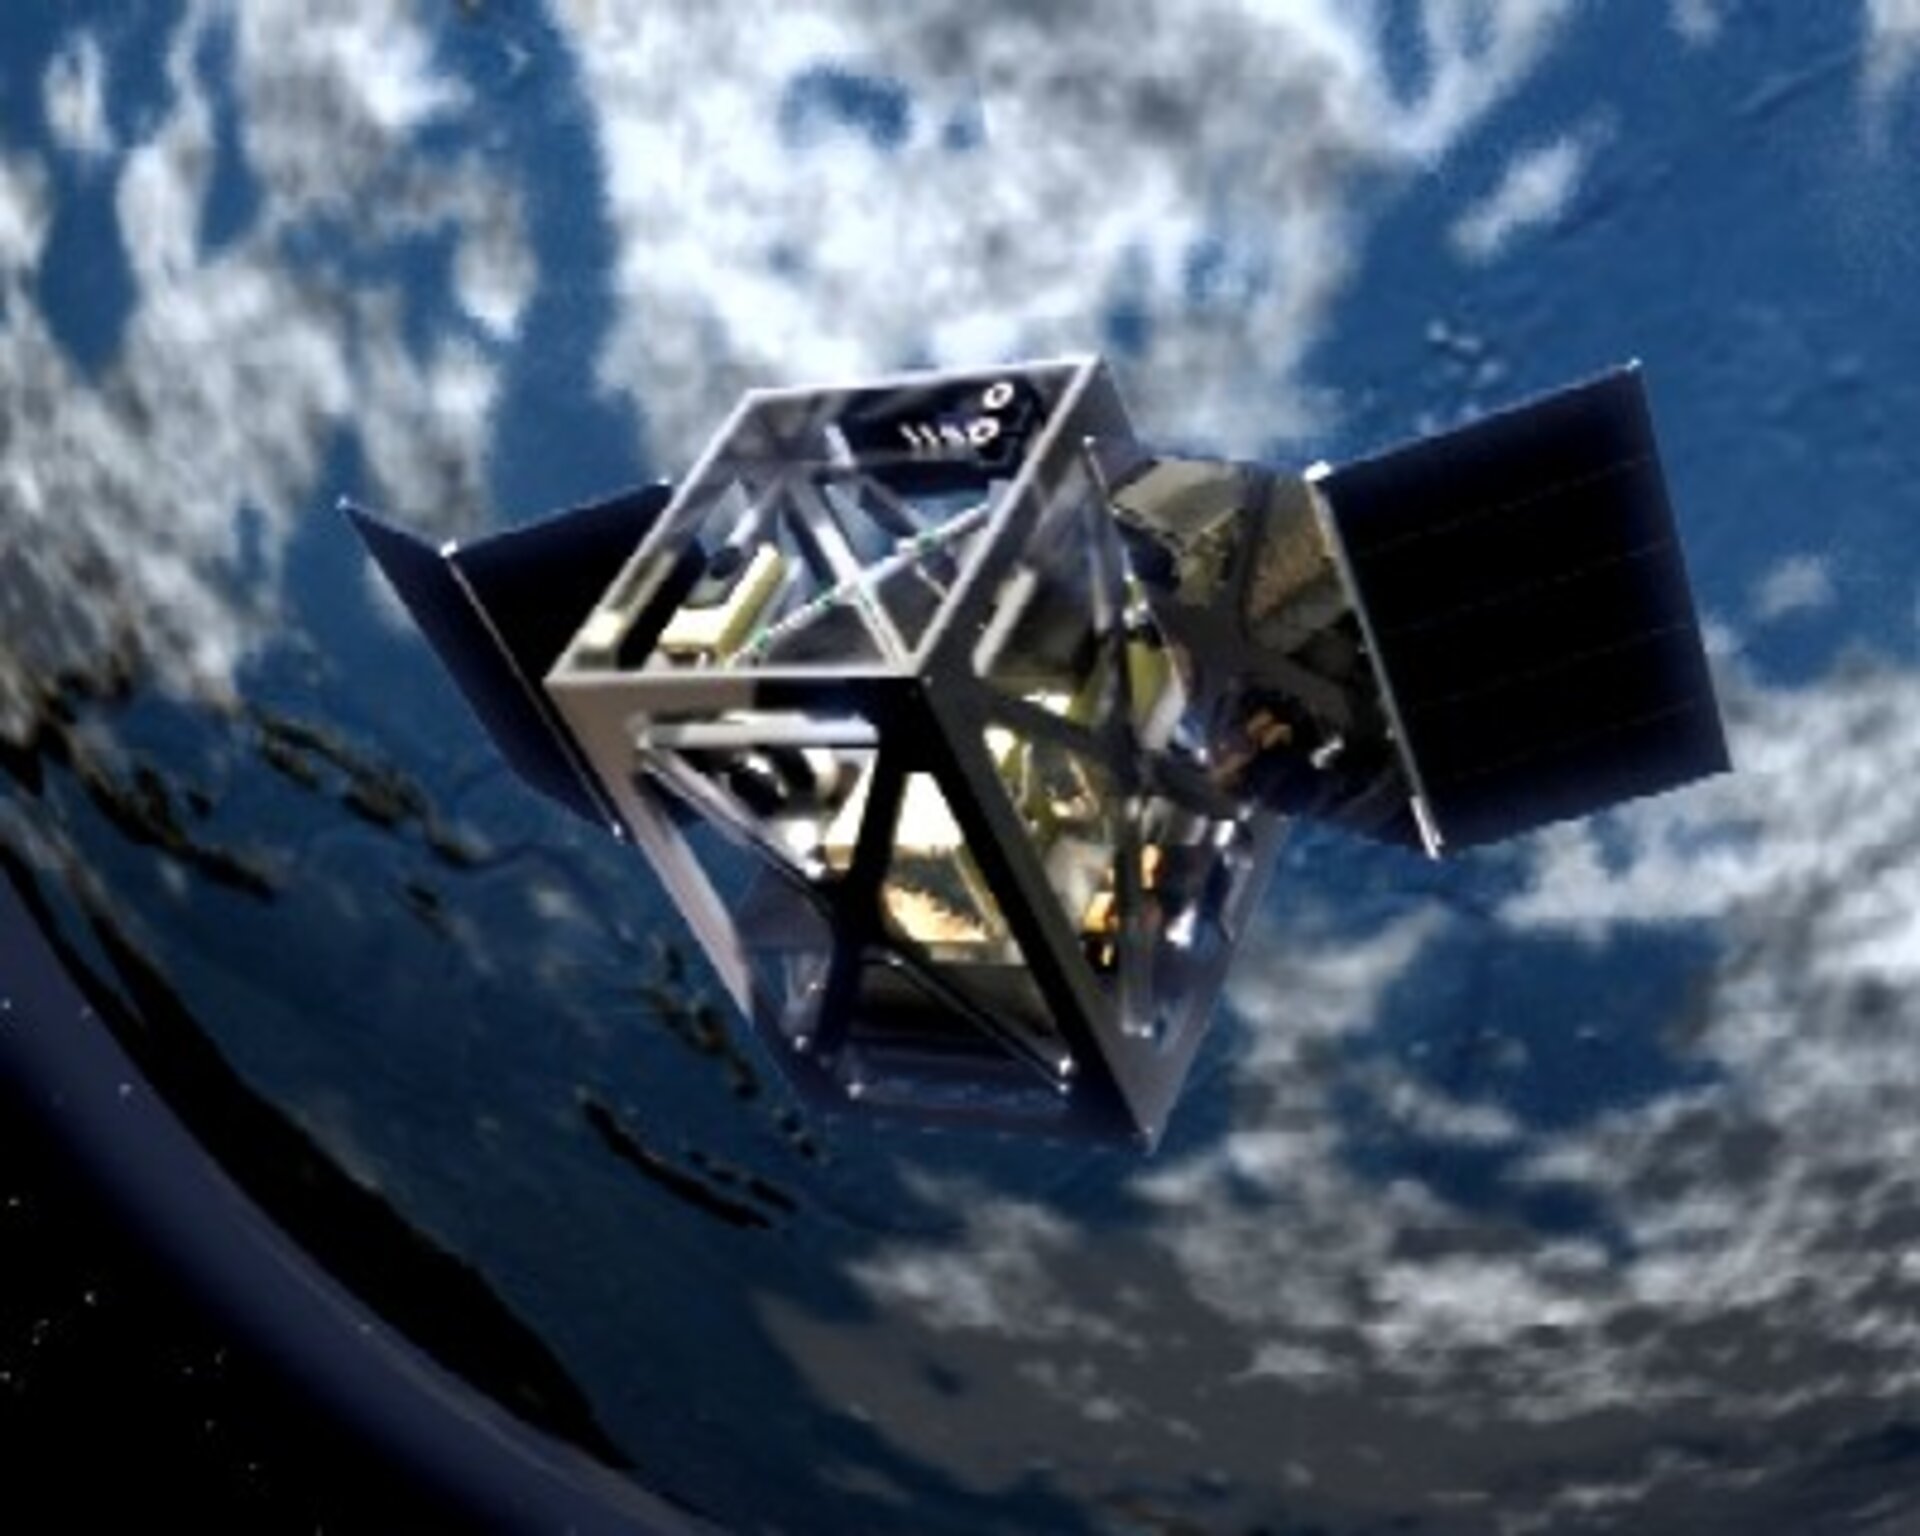 Artist's impression of the satellite imagined by SSETI students